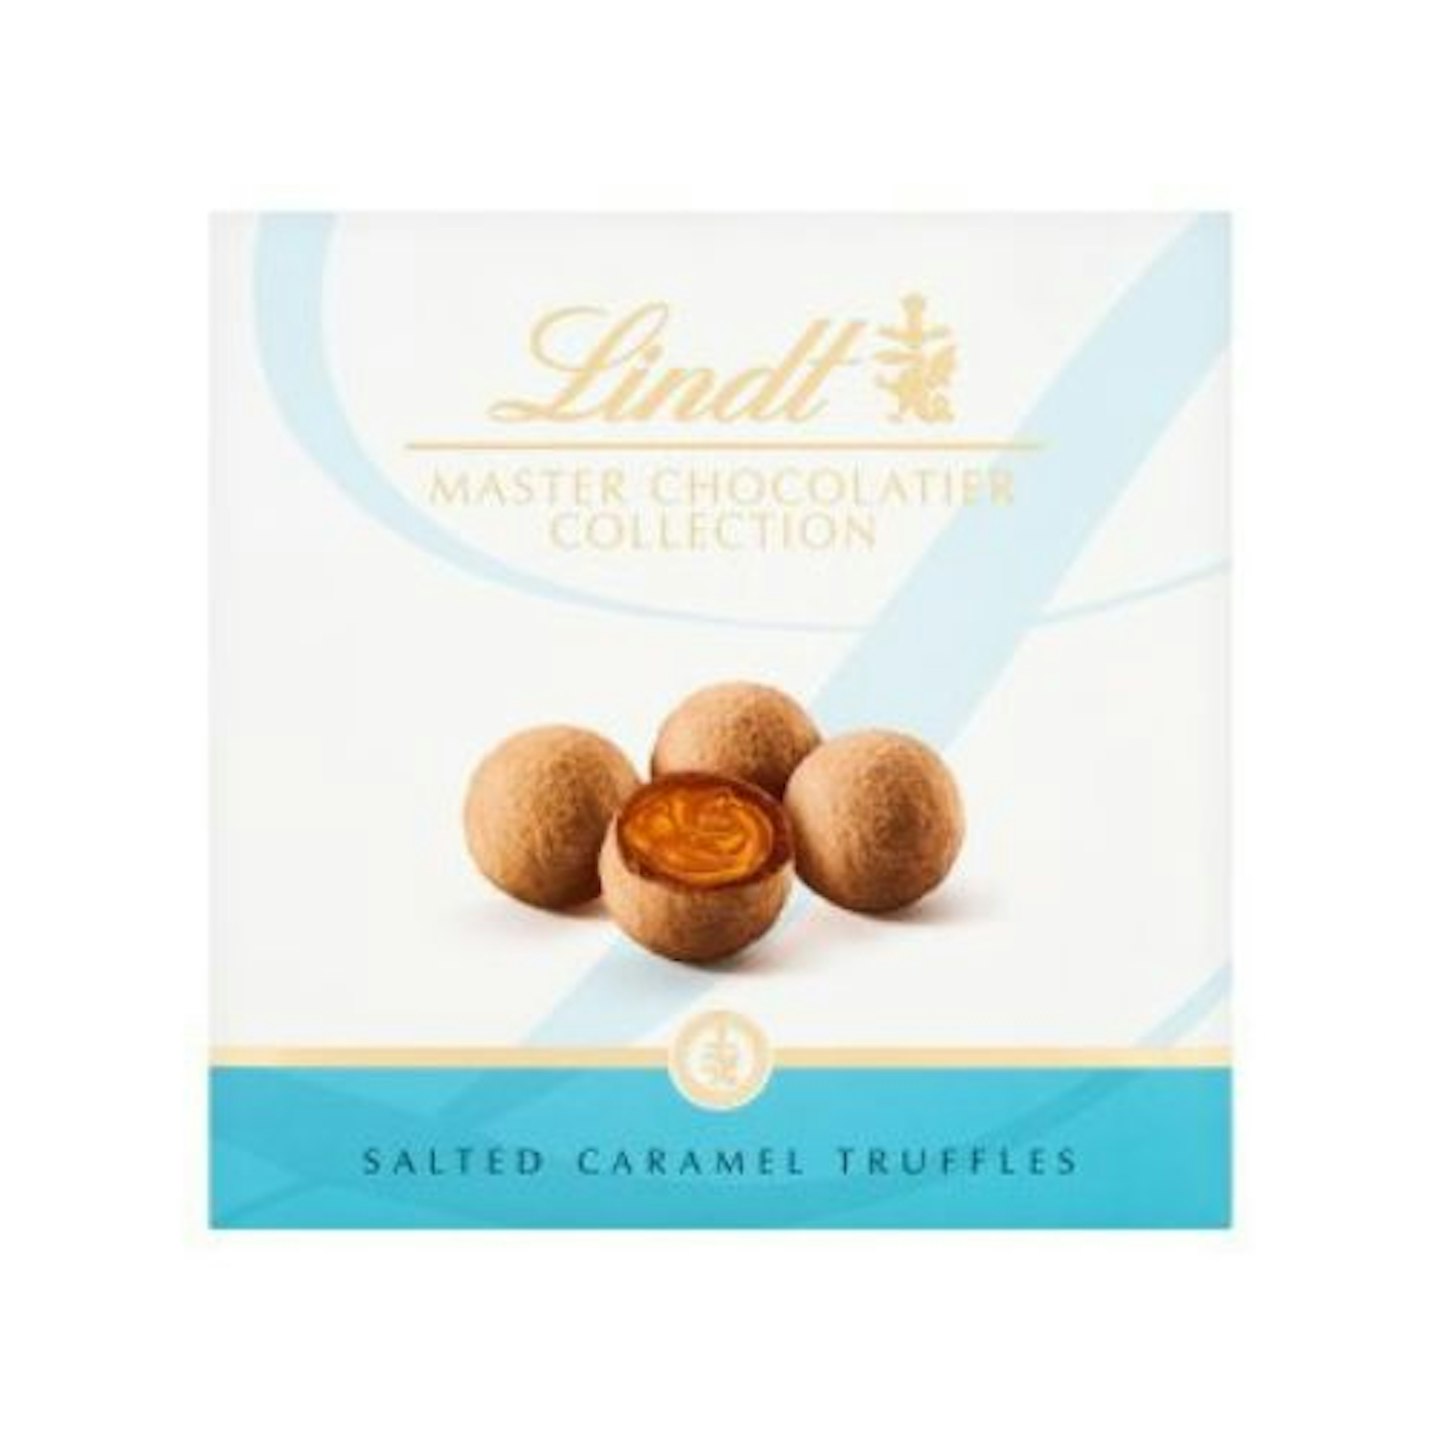 Lindt Master Chocolatier Collection Salted Caramel Truffles